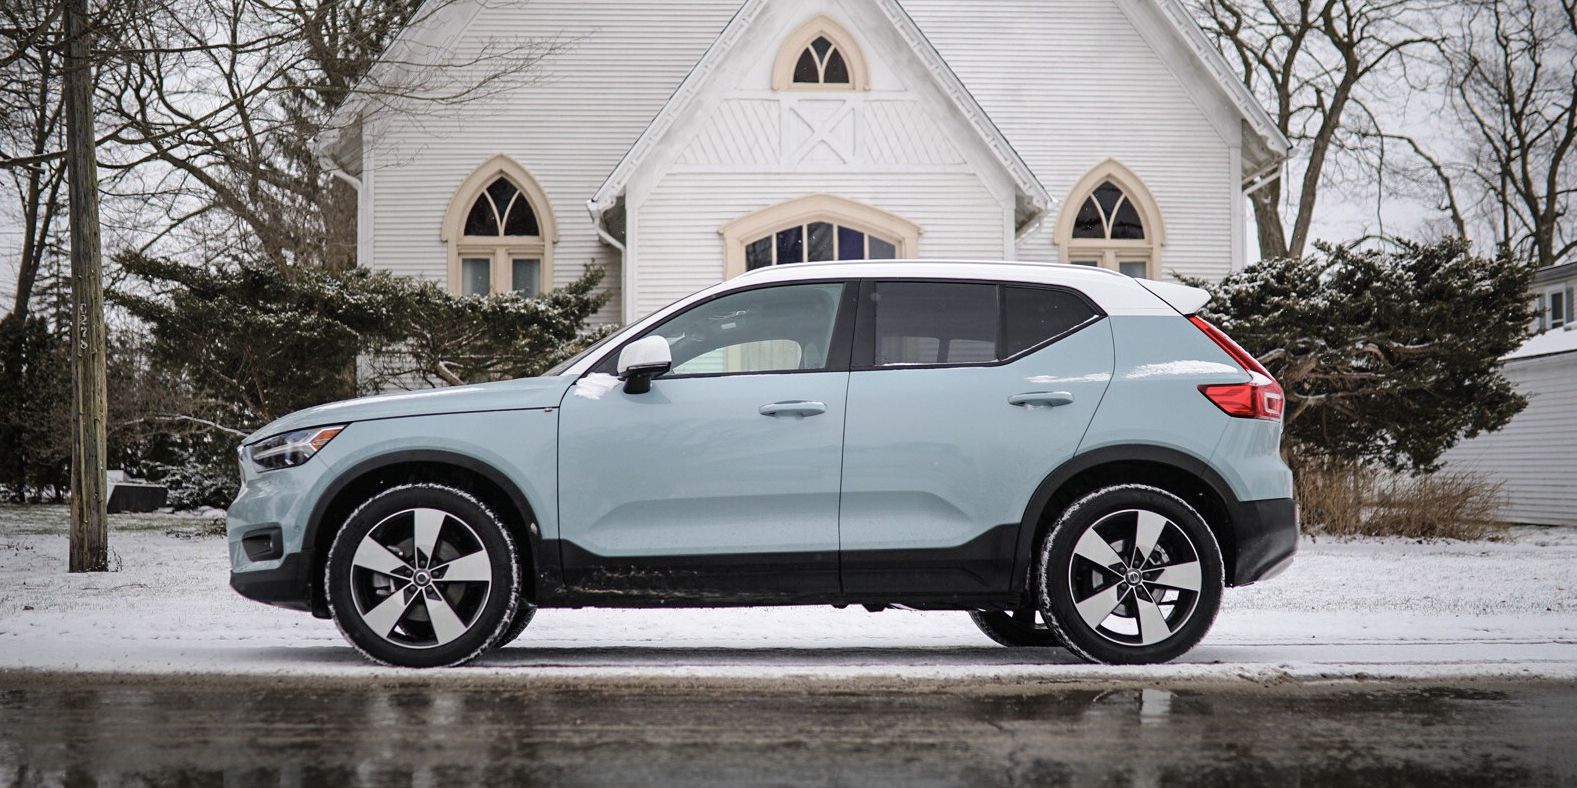 The 2019 Volvo XC40 Isn't Sporty, And That Makes it Great